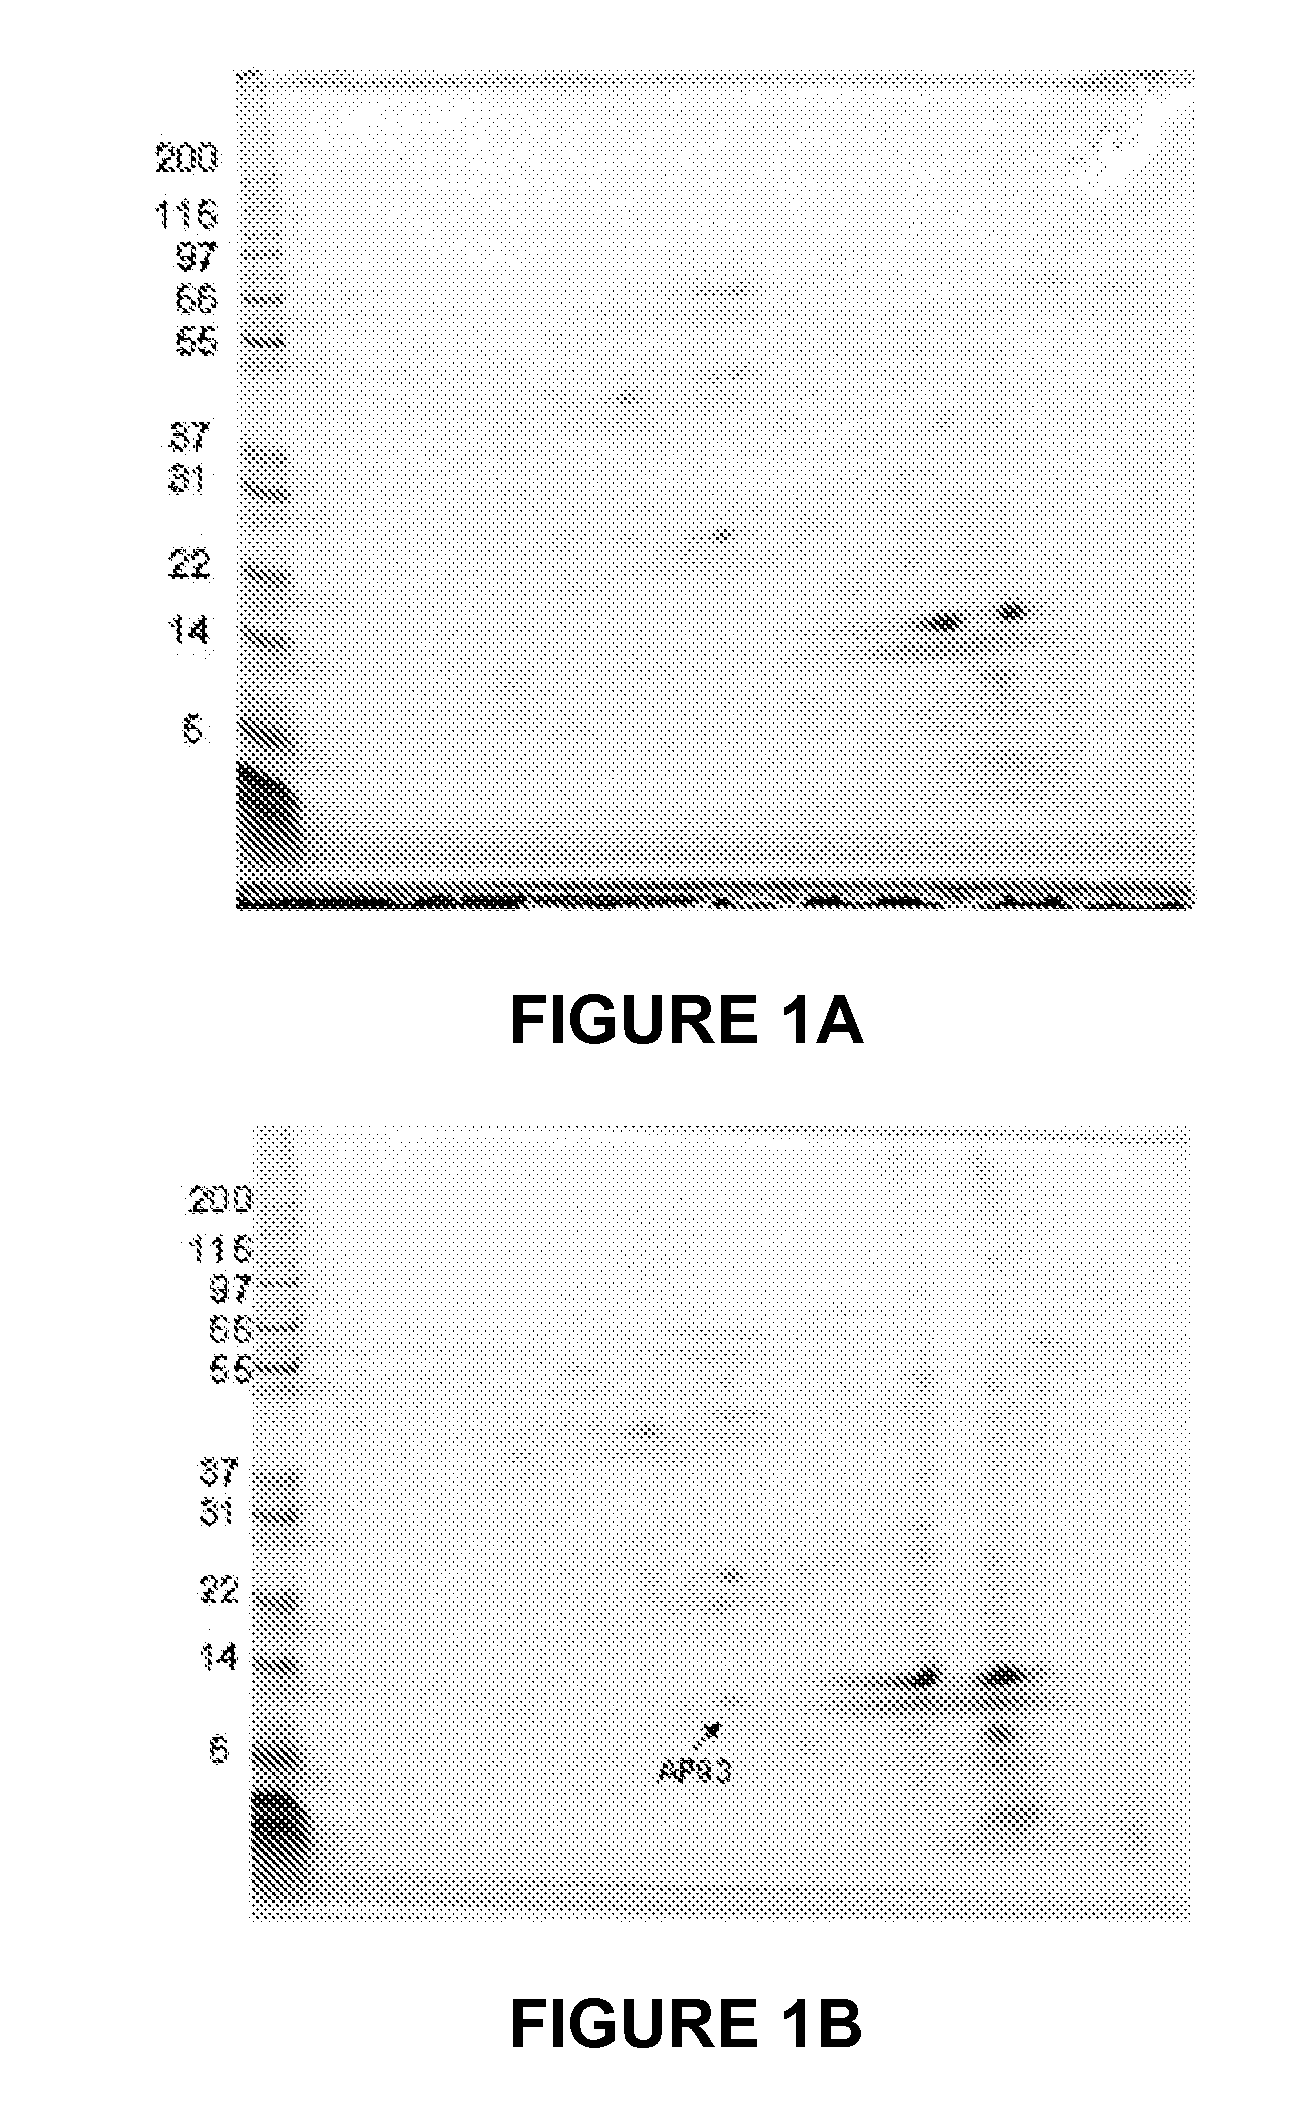 Methods and devices for diagnosis of appendicitis